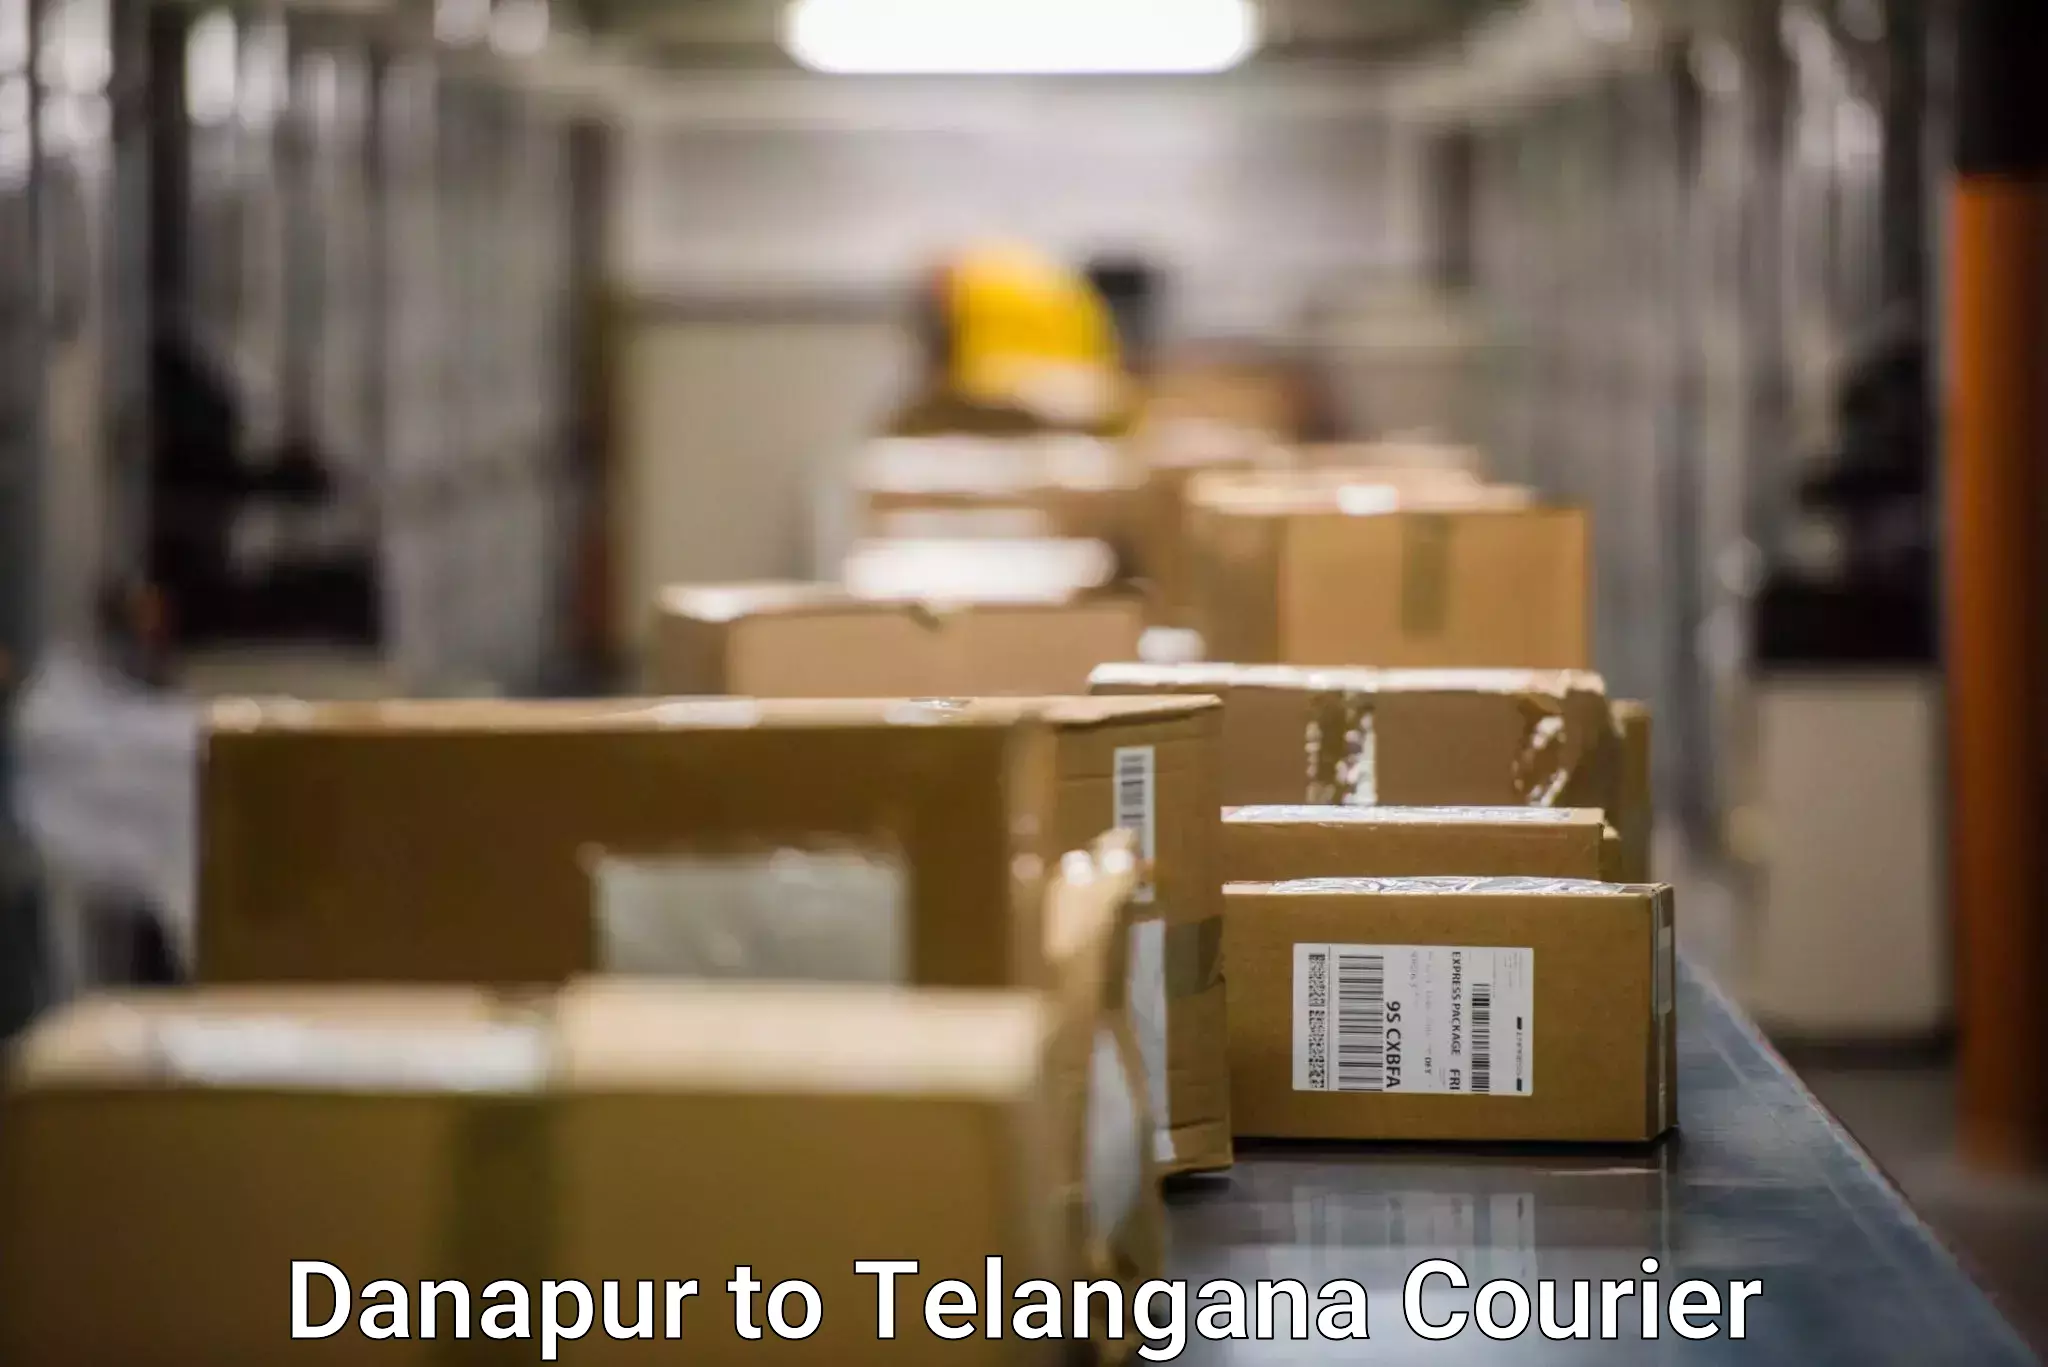 Ocean freight courier Danapur to Manopad